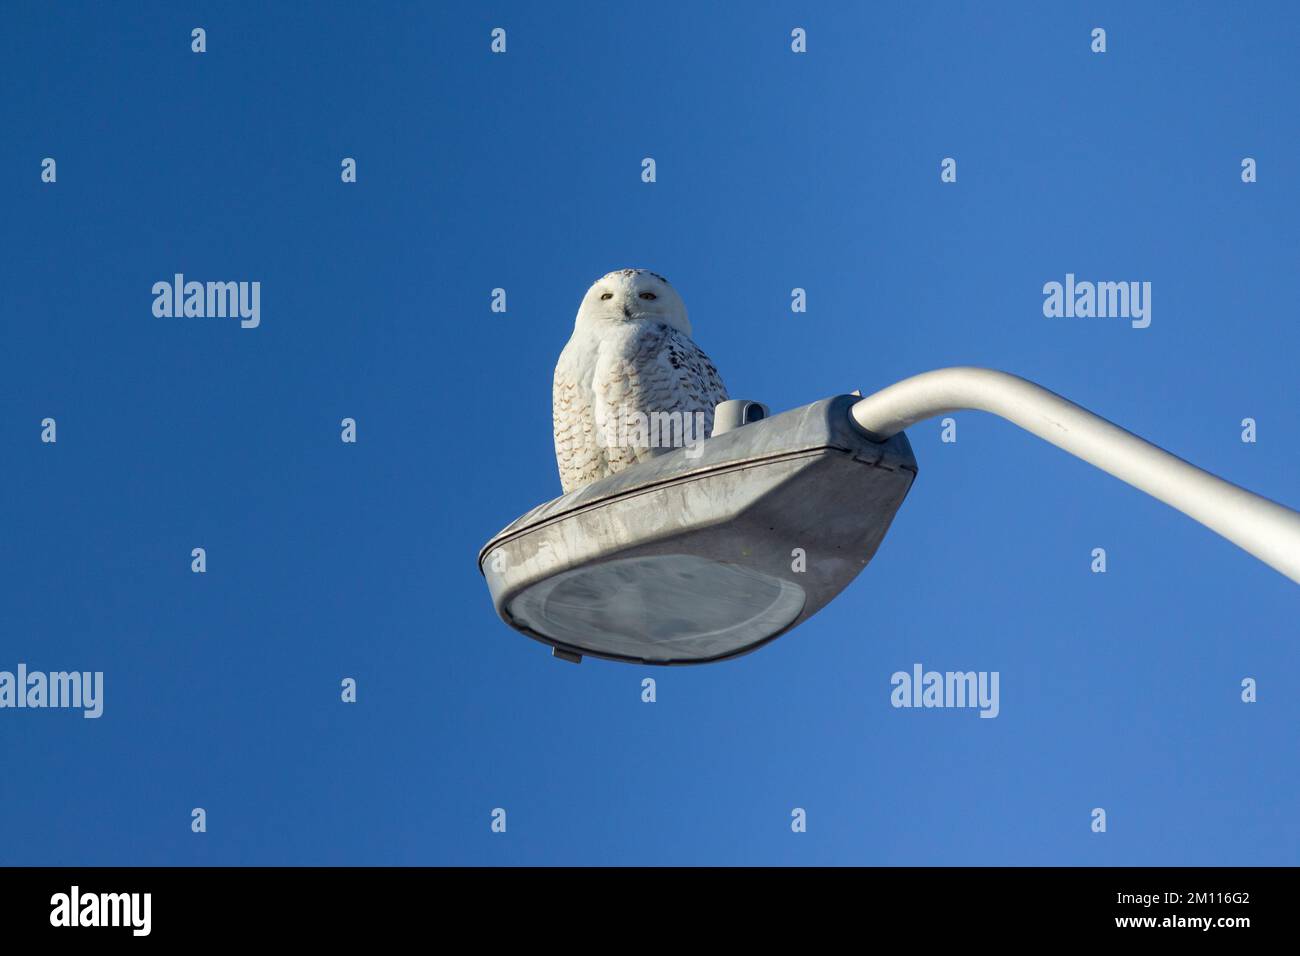 A snowy owl sits on a lamppost in winter surveying the surroundings Stock Photo